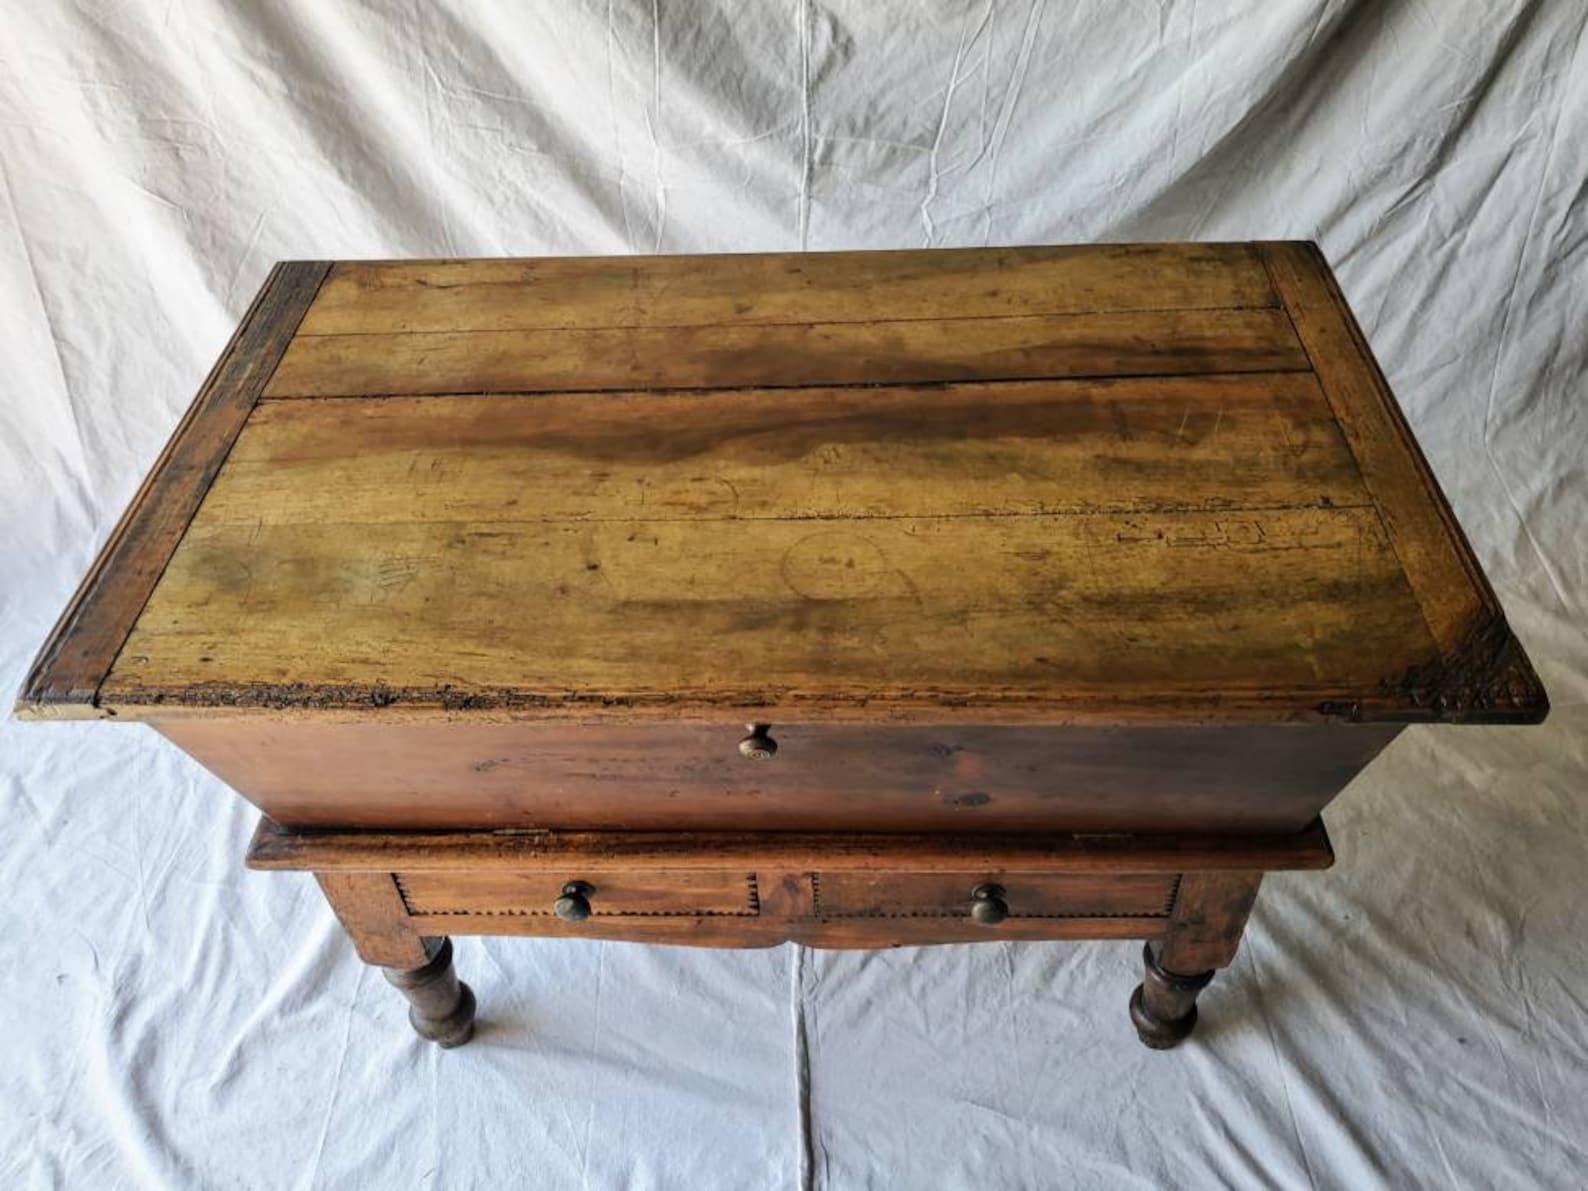 Patina perfection! A rustic French Provincial baker's dough bin trough on stand form the early 19th century. The Restoration / Louis Philippe period antique having a drop-front panel on later updated hinges, opening to a spacious open interior,